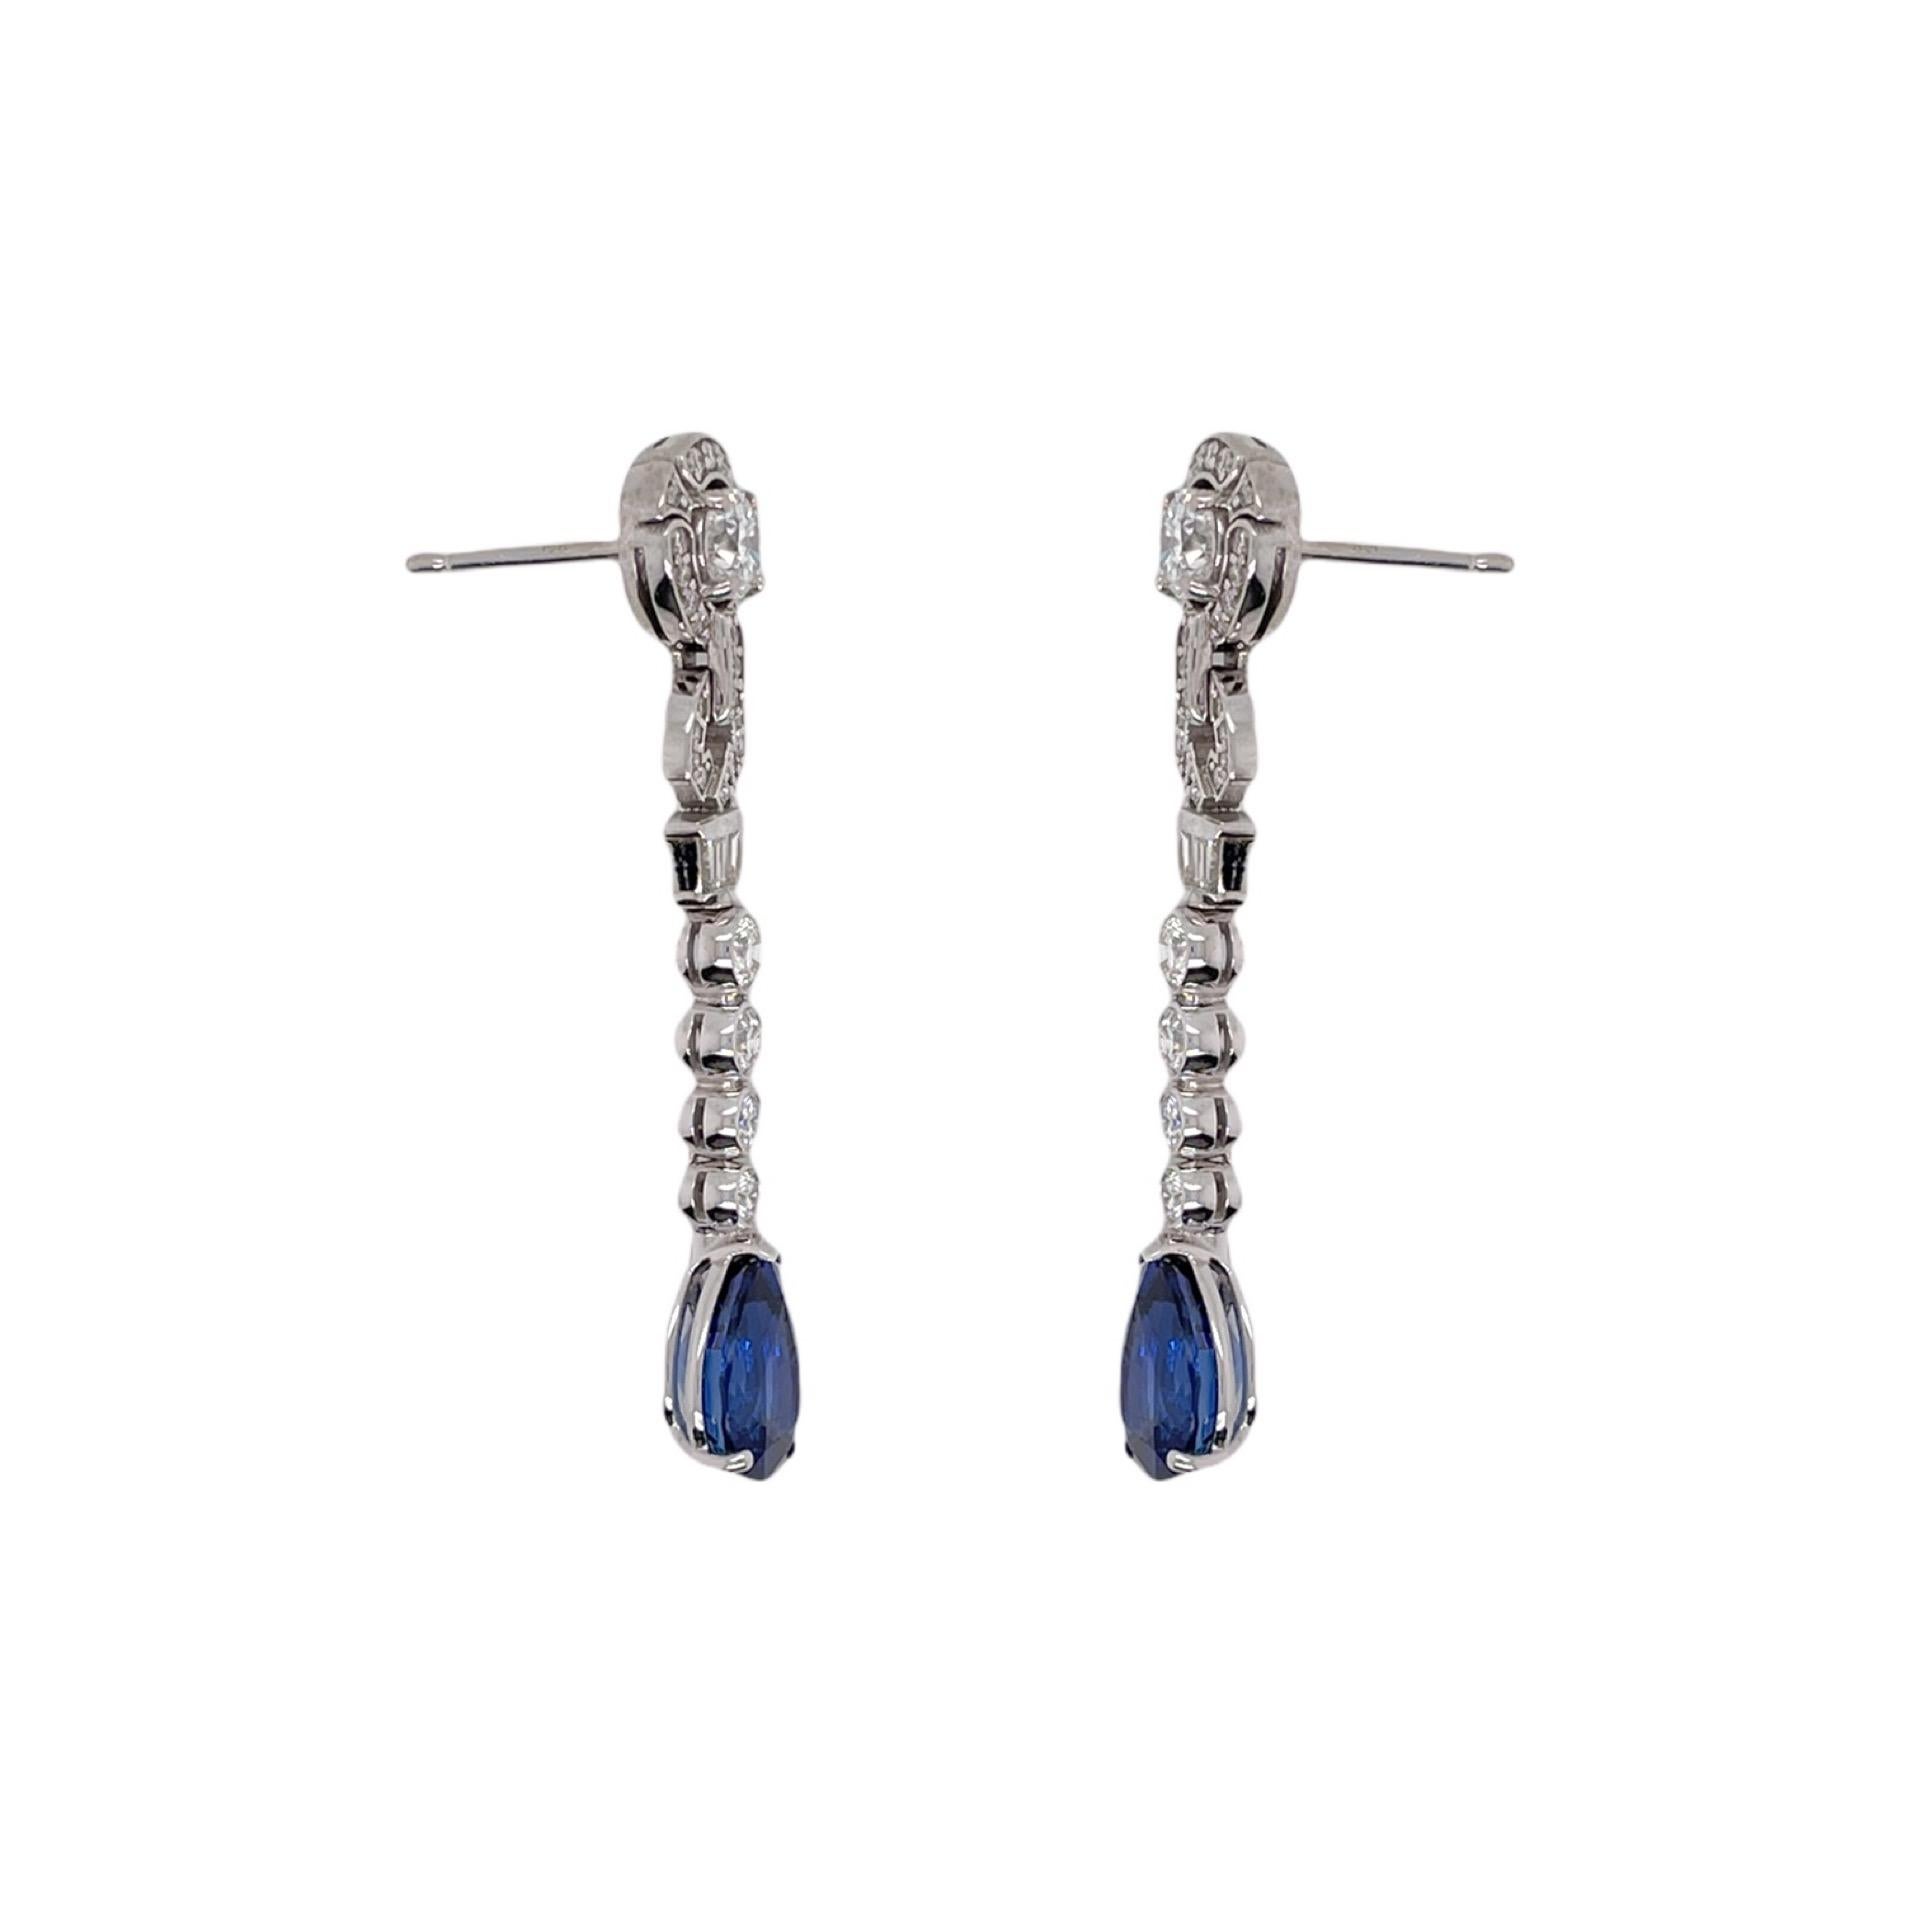 Earrings contain 2 fine pear shape sapphires 4.90tcw, 2 round brilliant diamonds on the top 0.82tcw and round brilliant & baguette diamonds within entire earring, 1.10tcw. Sapphires are GIA certified and originate from Madagascar. Diamonds are